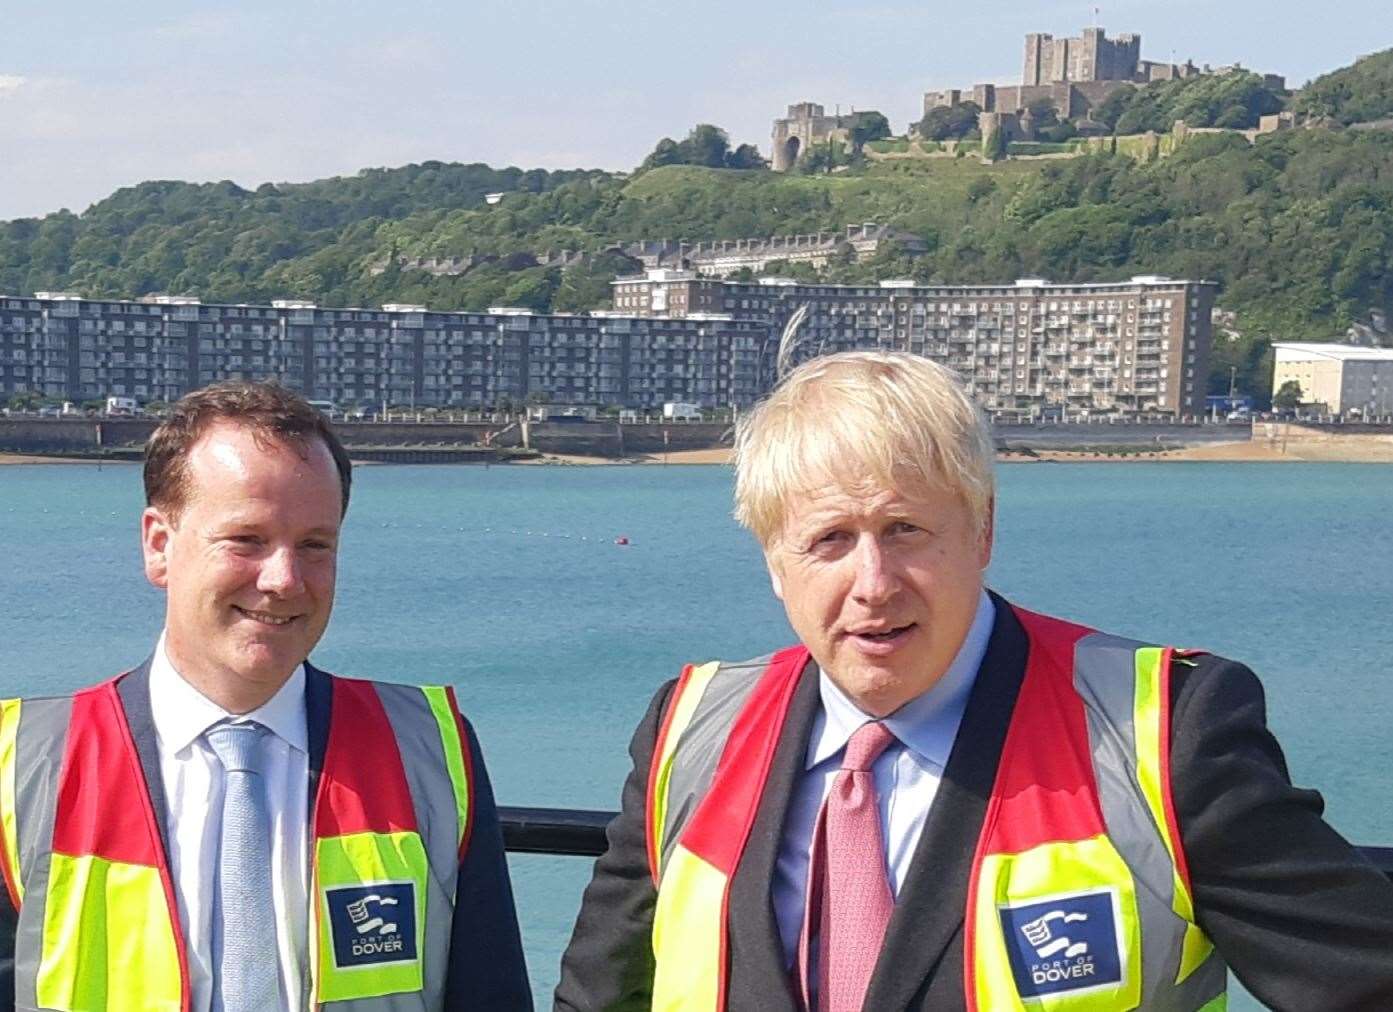 Mr Elphicke with Boris Johnson on his visit to Dover on July 11. This was a fortnight before Mr Johnson became Prime Minister